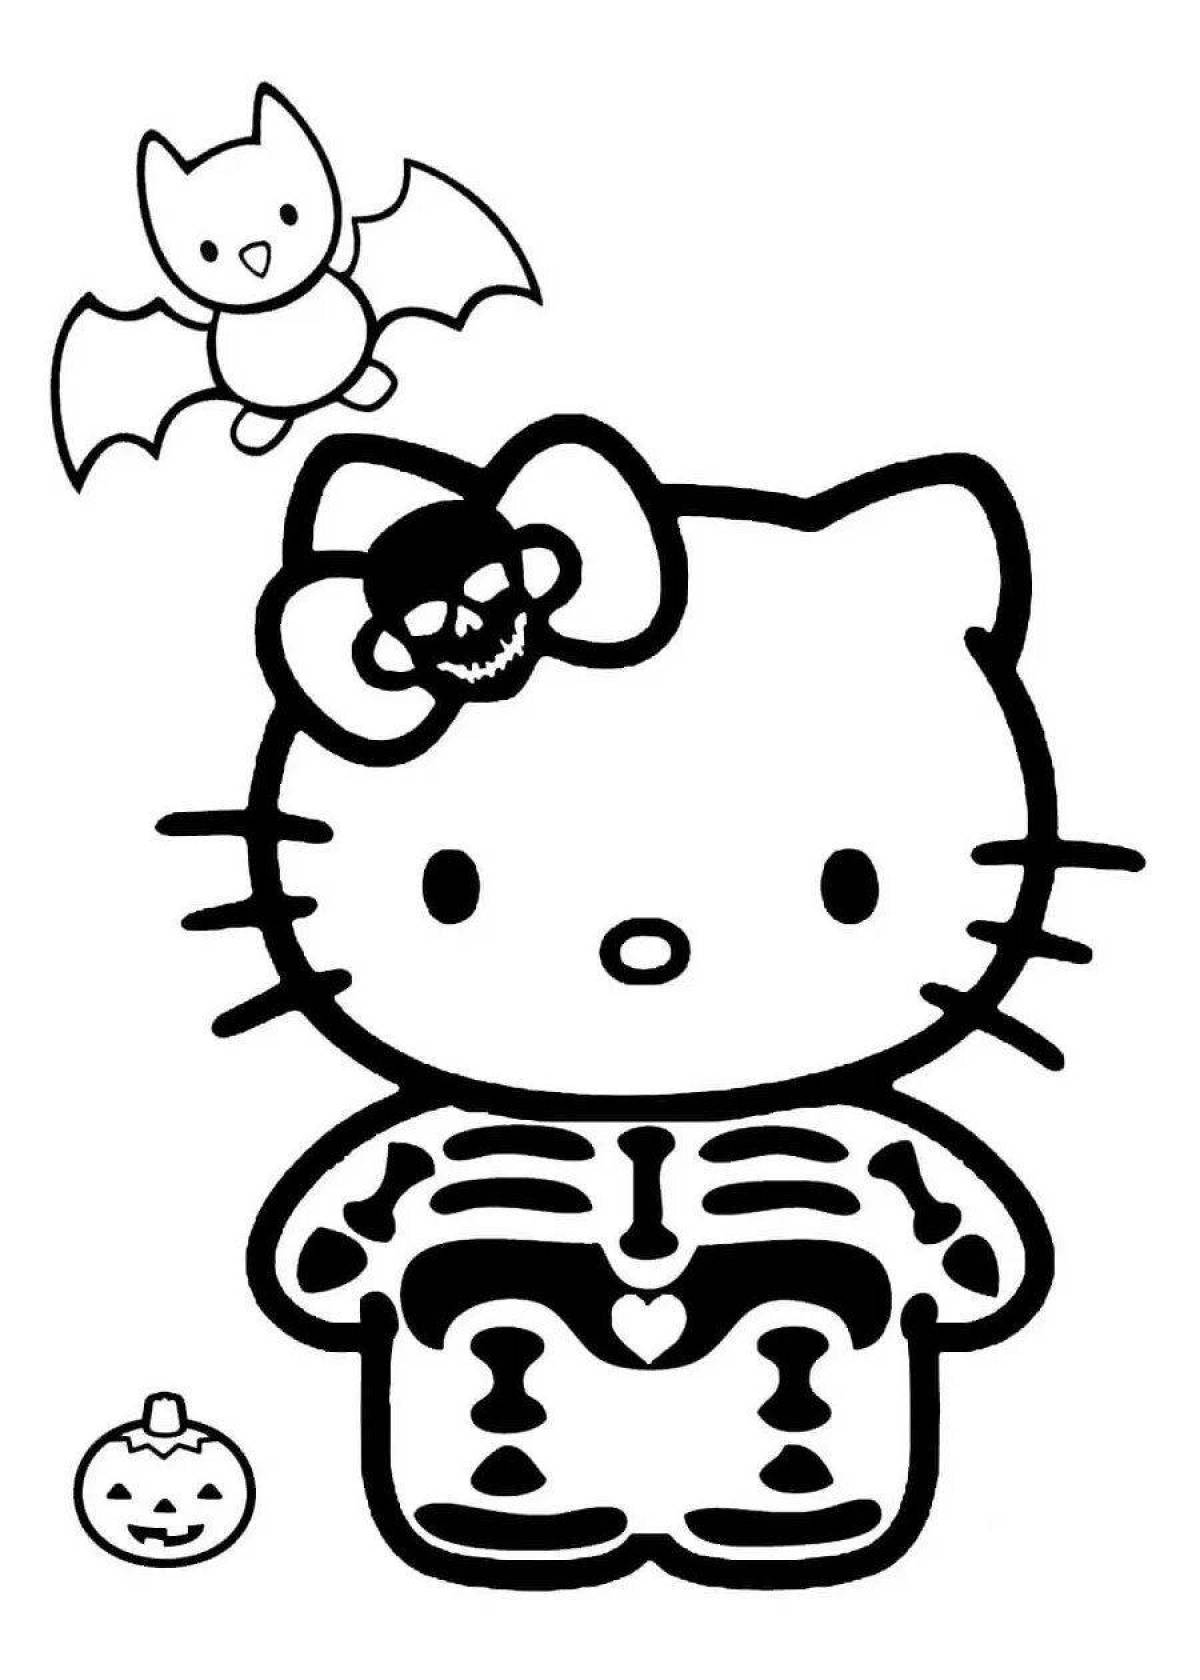 Color-mania hello kitty stickers coloring page